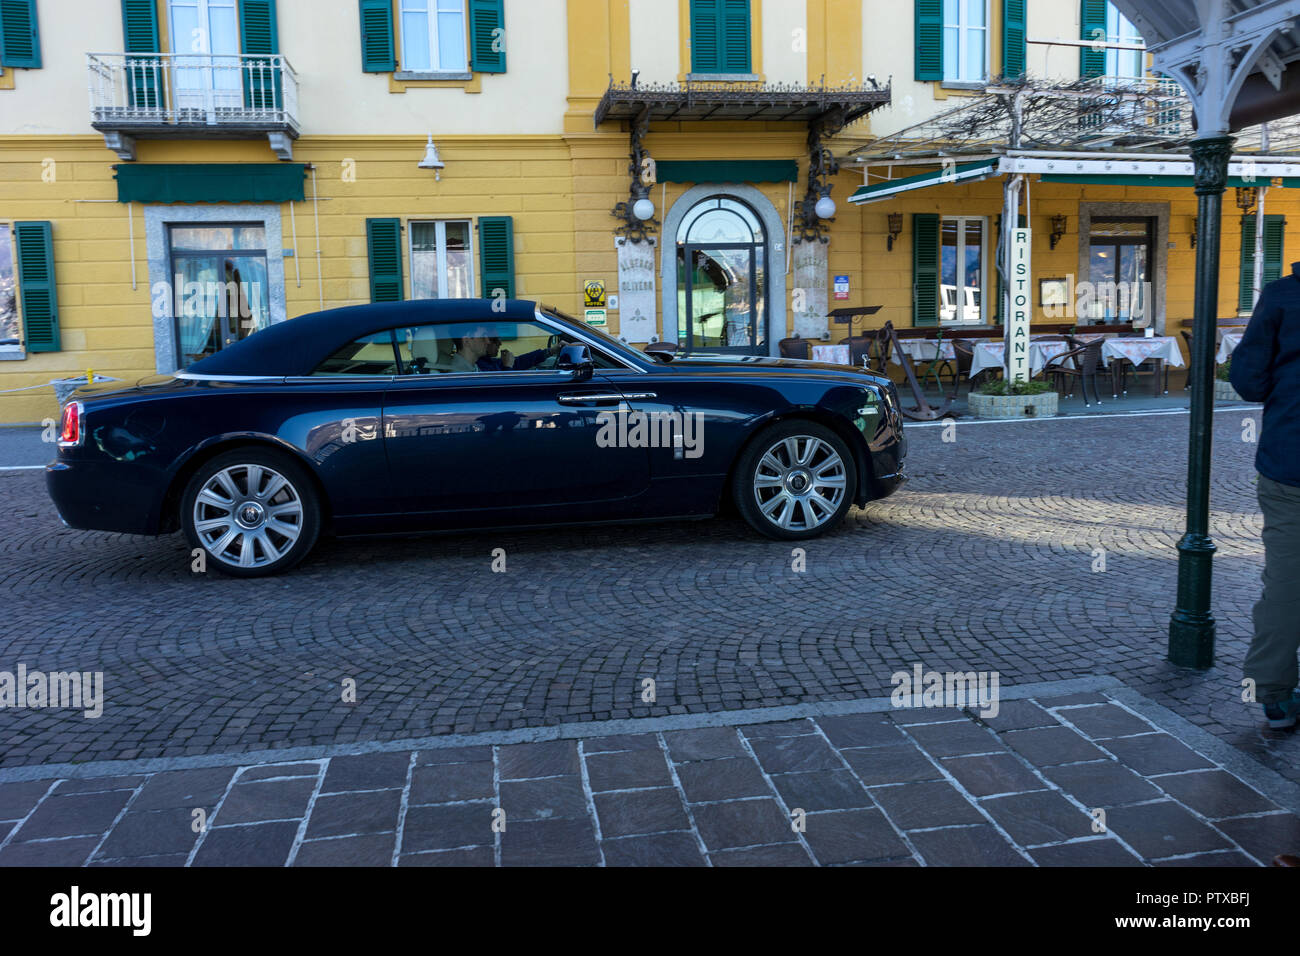 Menaggio, Italy-April 2, 2018: Rolls Royce Phantom waiting for a boat at waterside quay, Lombardy Stock Photo